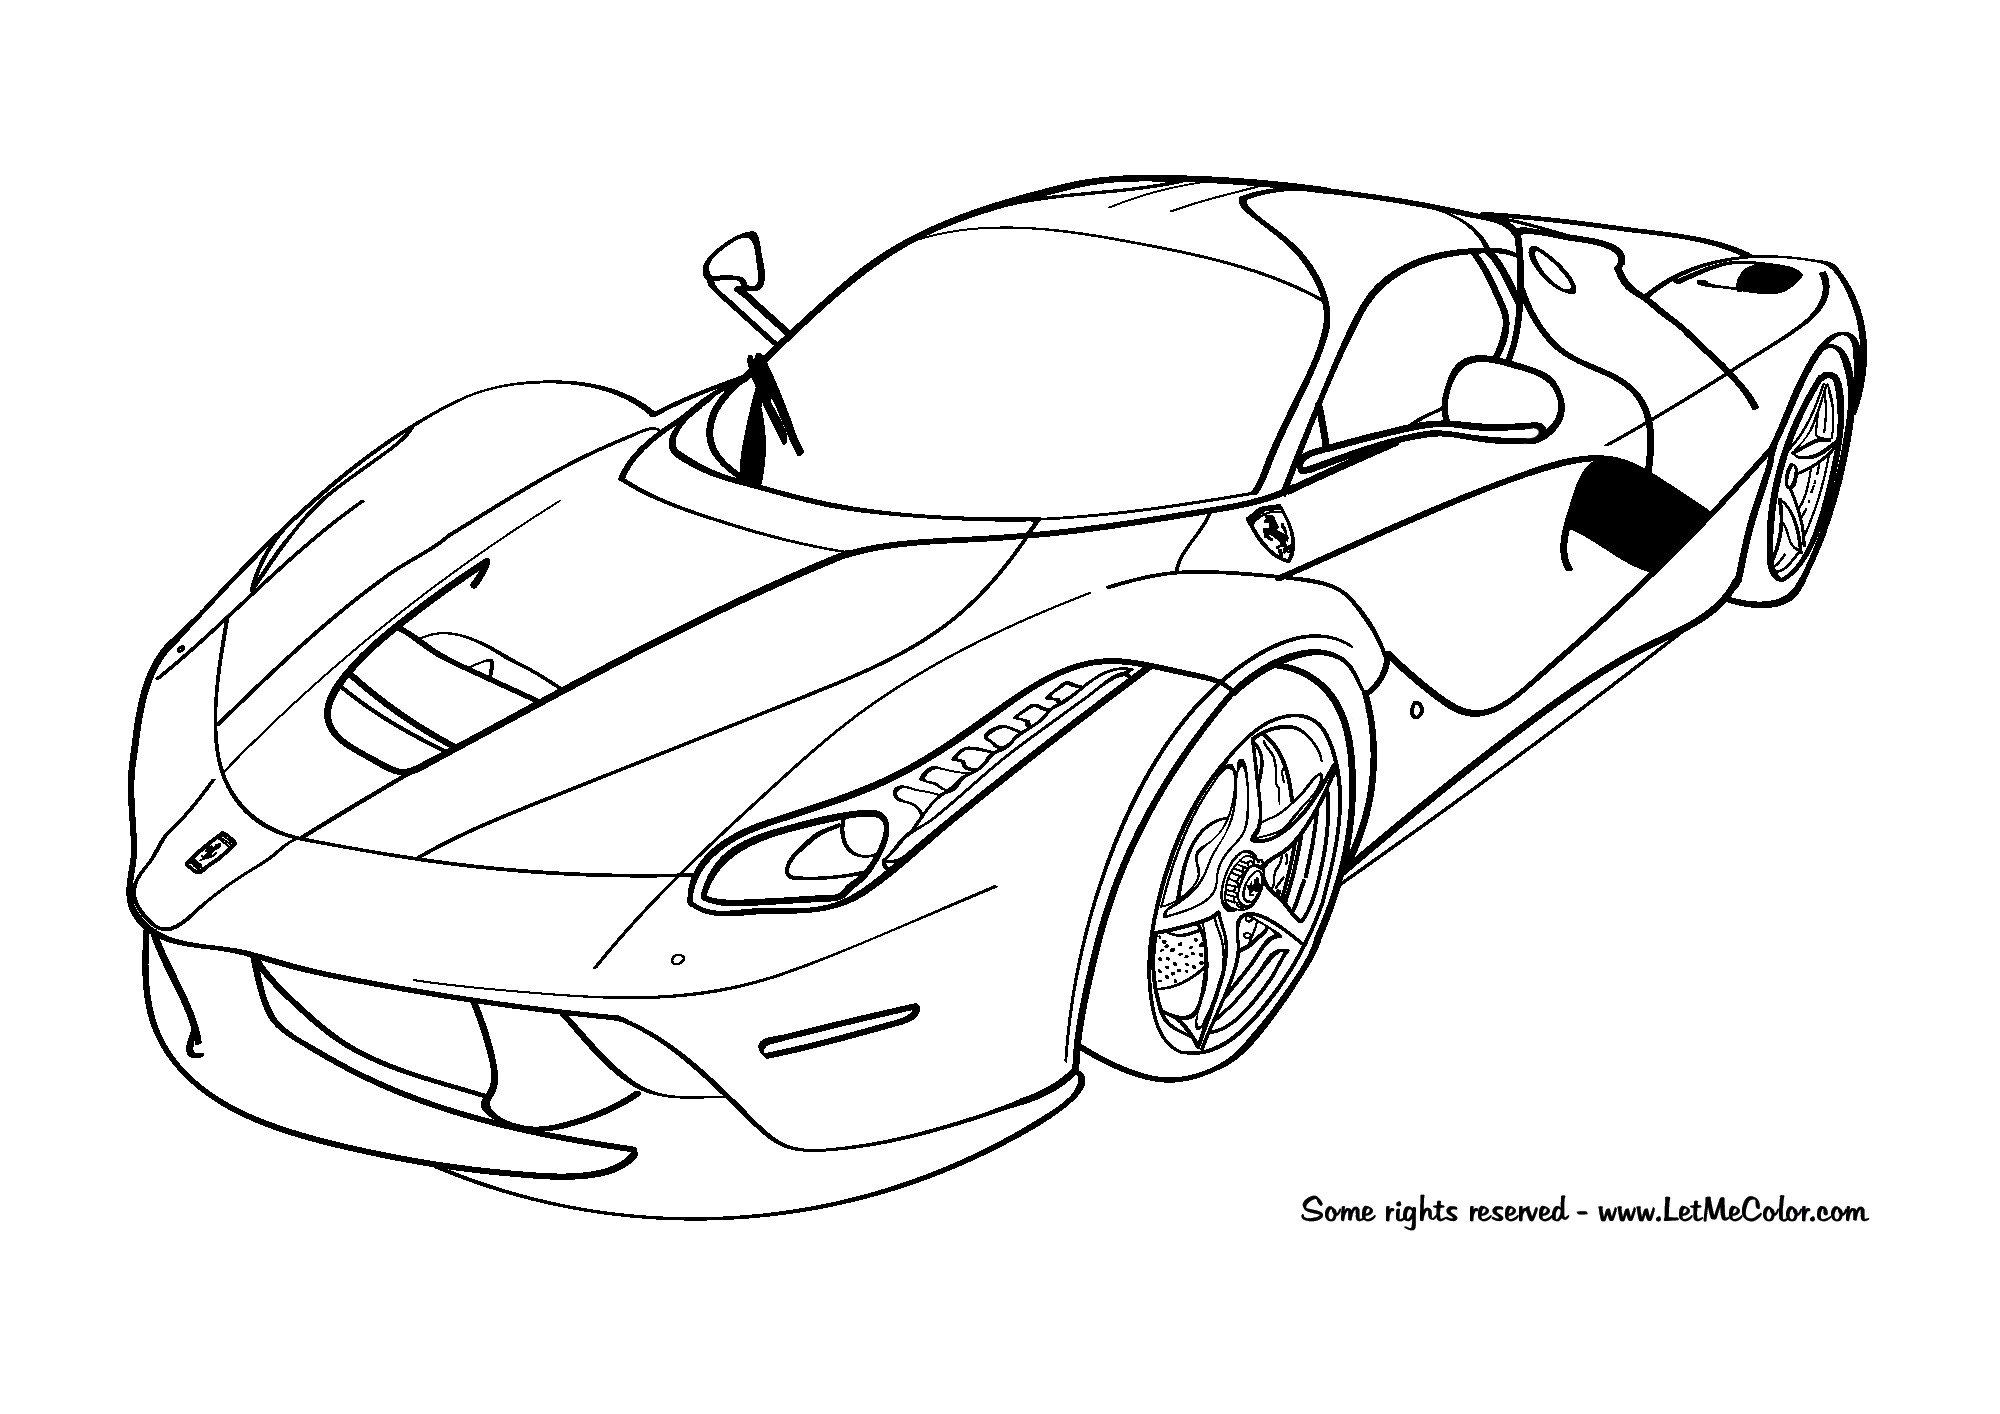 Coloring Pages Of Cars Beautiful Subaru Coloring Pages in 2020 | Cars coloring  pages, Sports coloring pages, Race car coloring pages